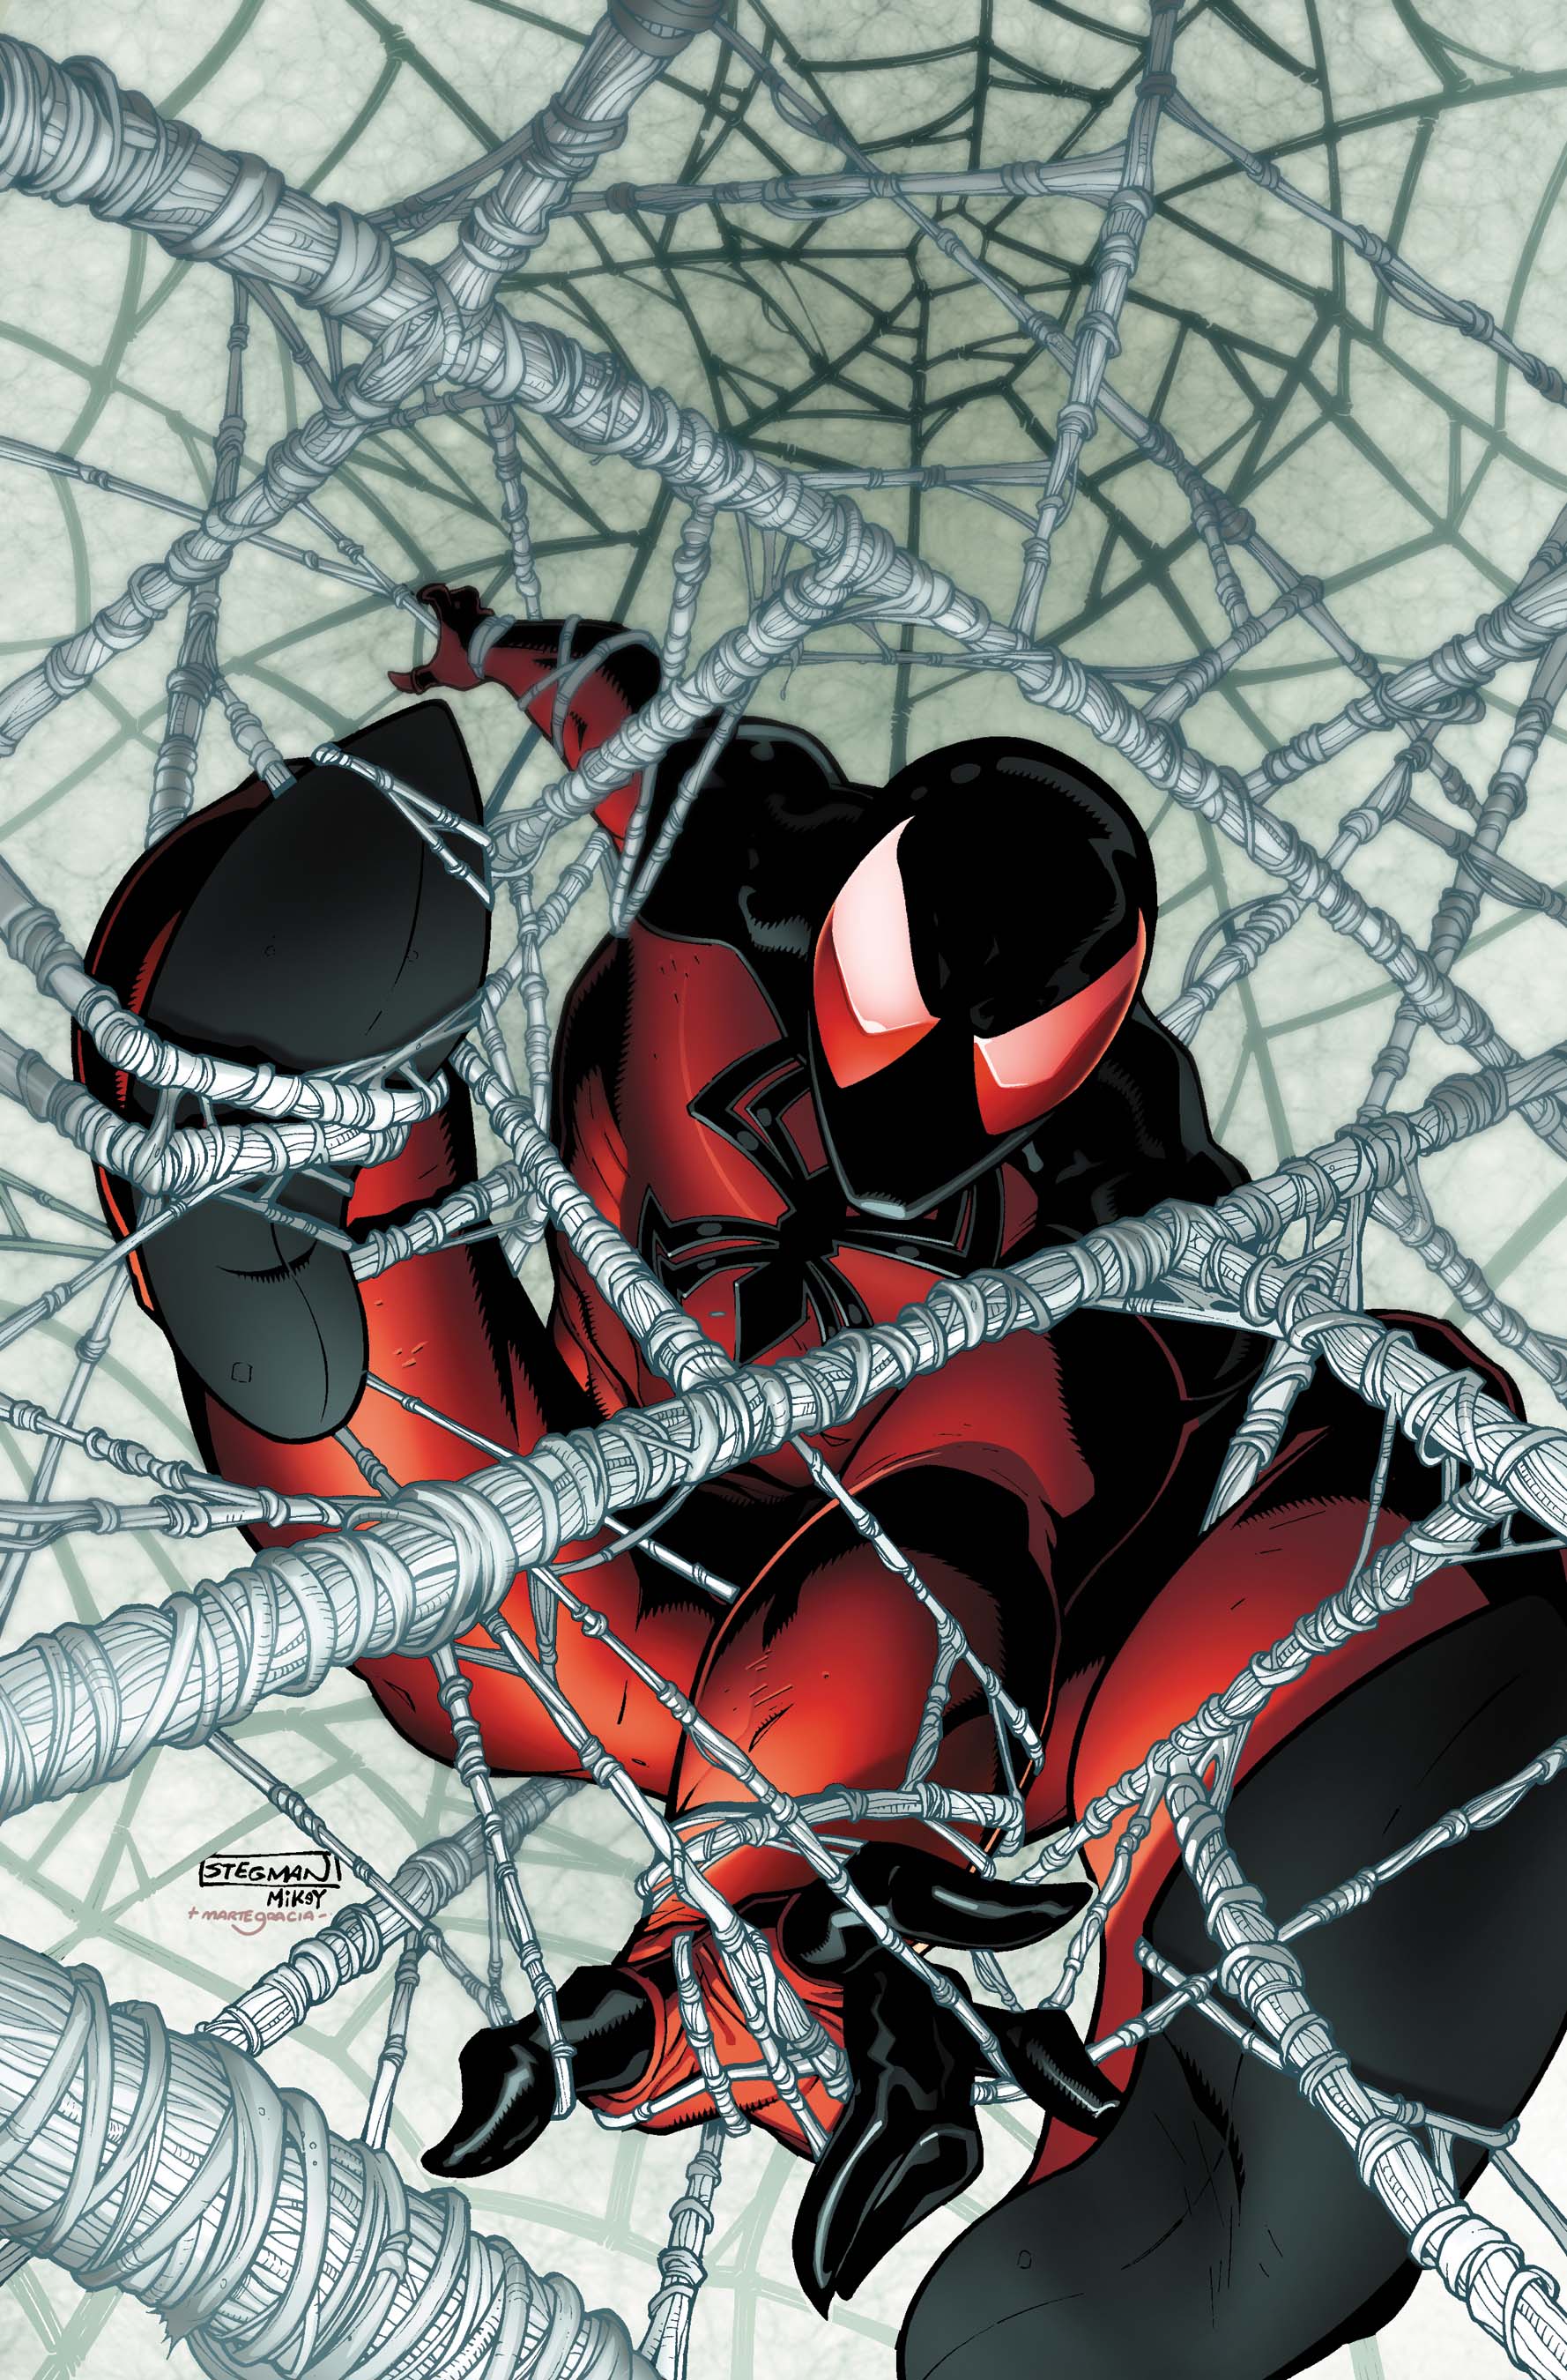 NYCC 2011: Marvel Resurrects the SCARLET SPIDER This January